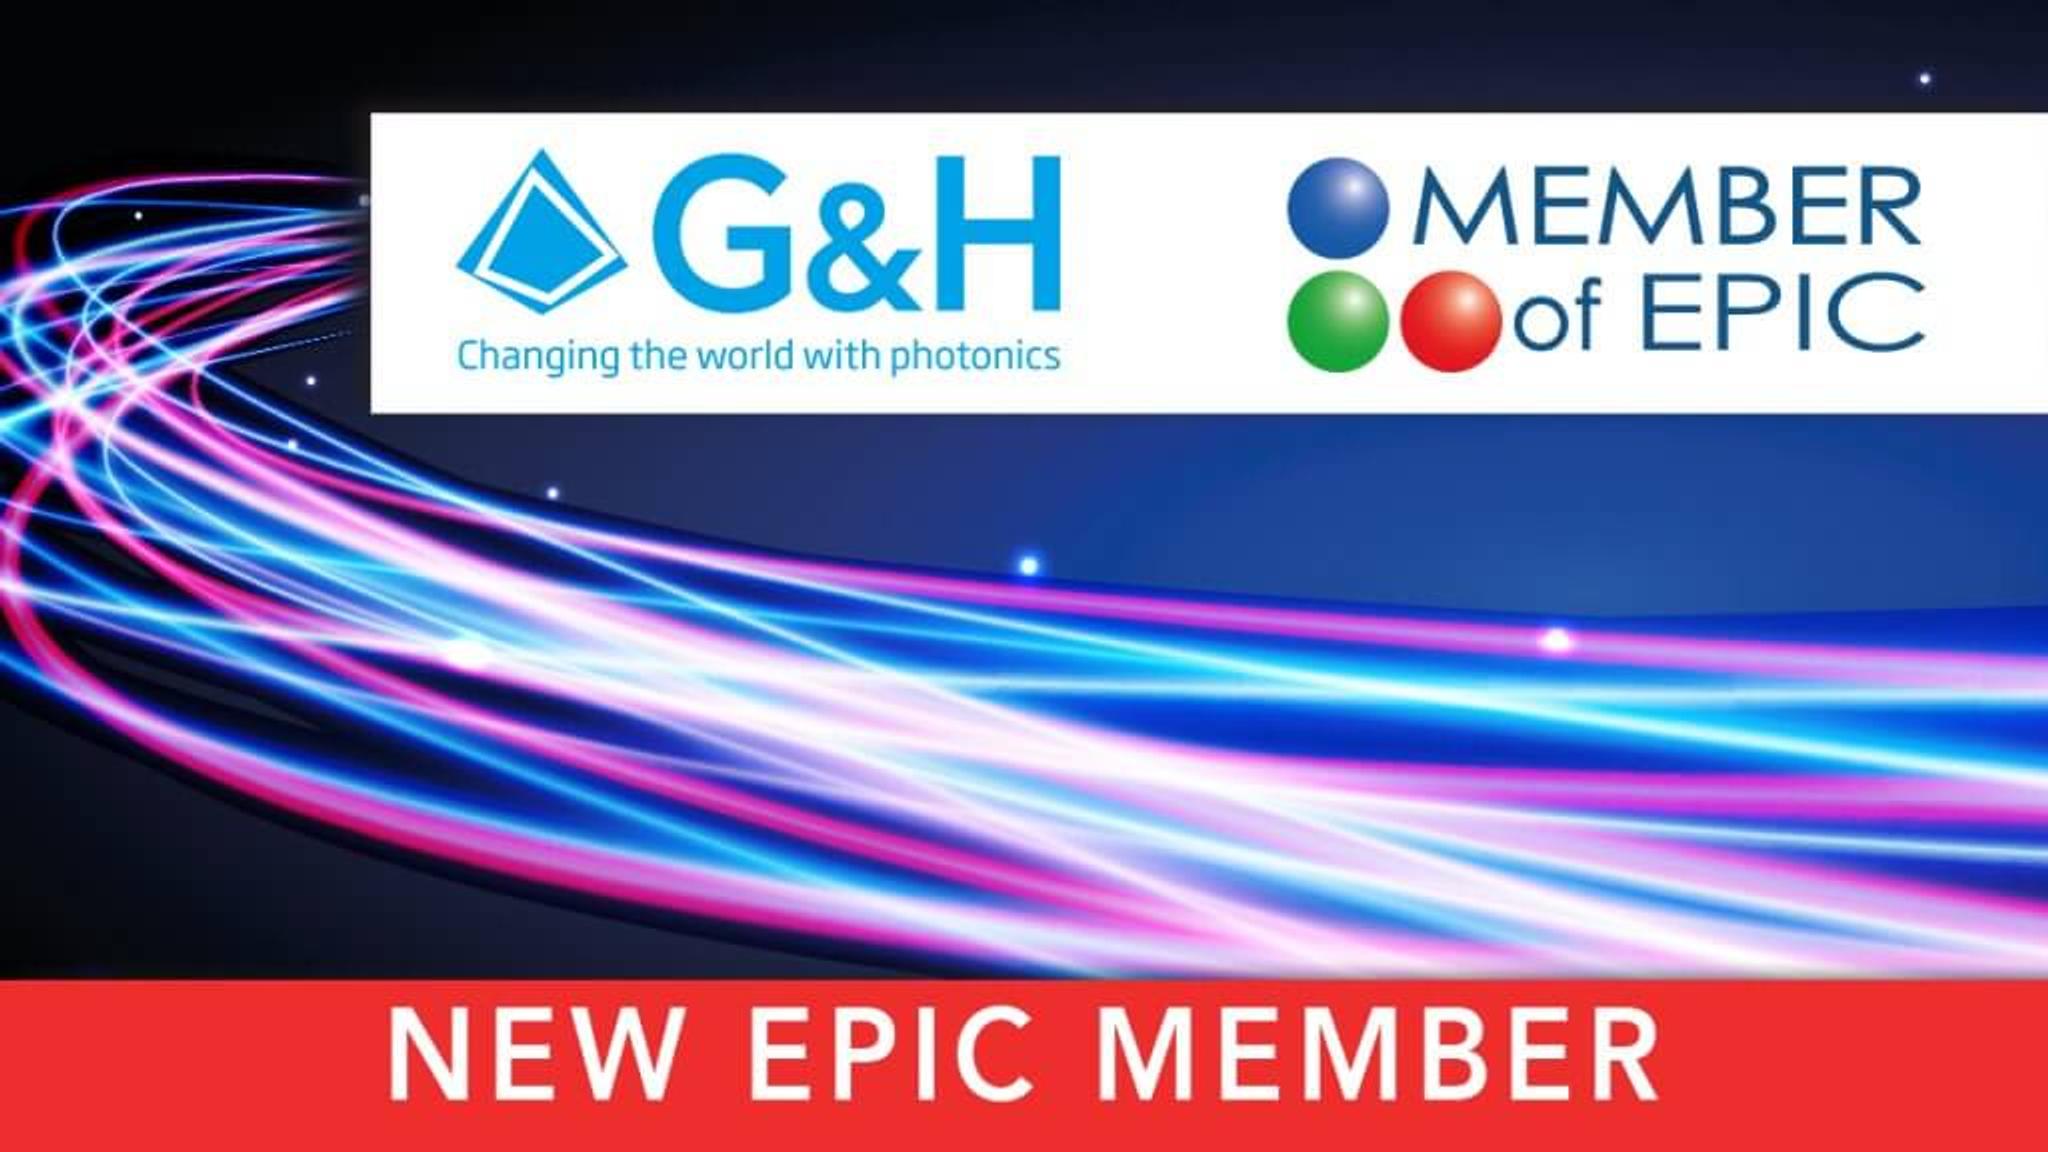 G&H becomes new EPIC member